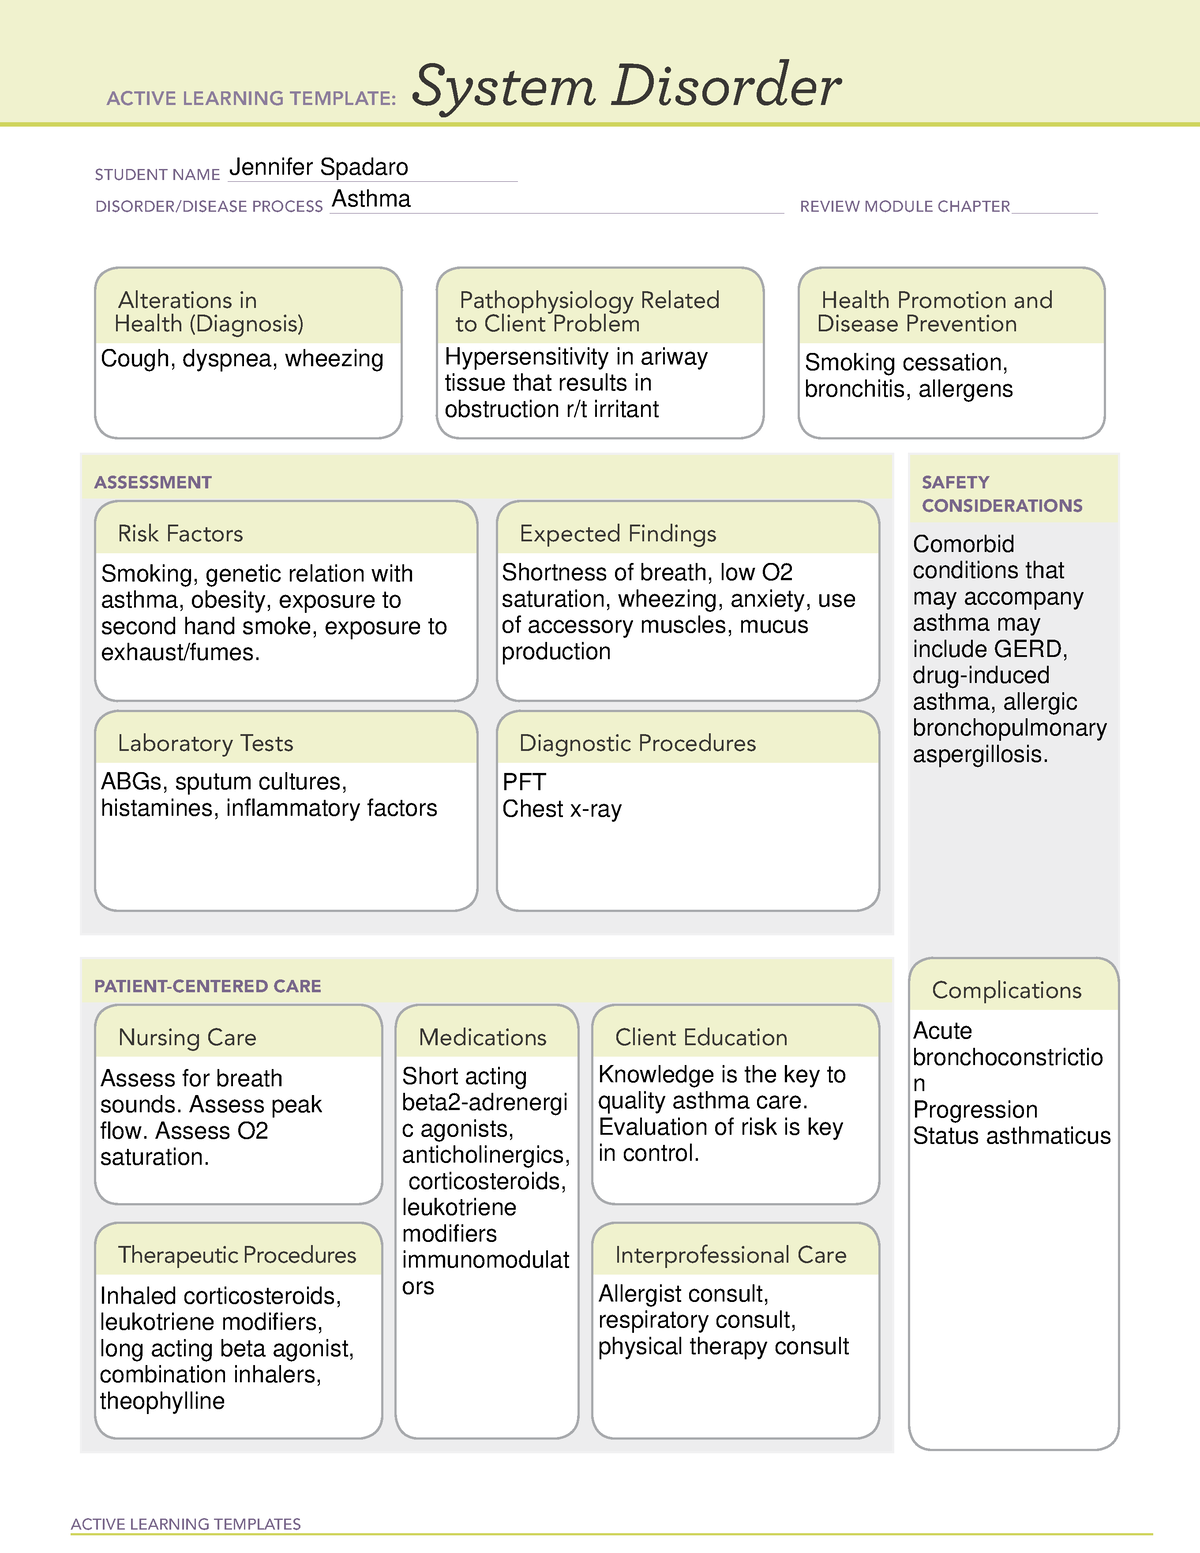 Alt asthma - active learning template - ACTIVE LEARNING TEMPLATES ...